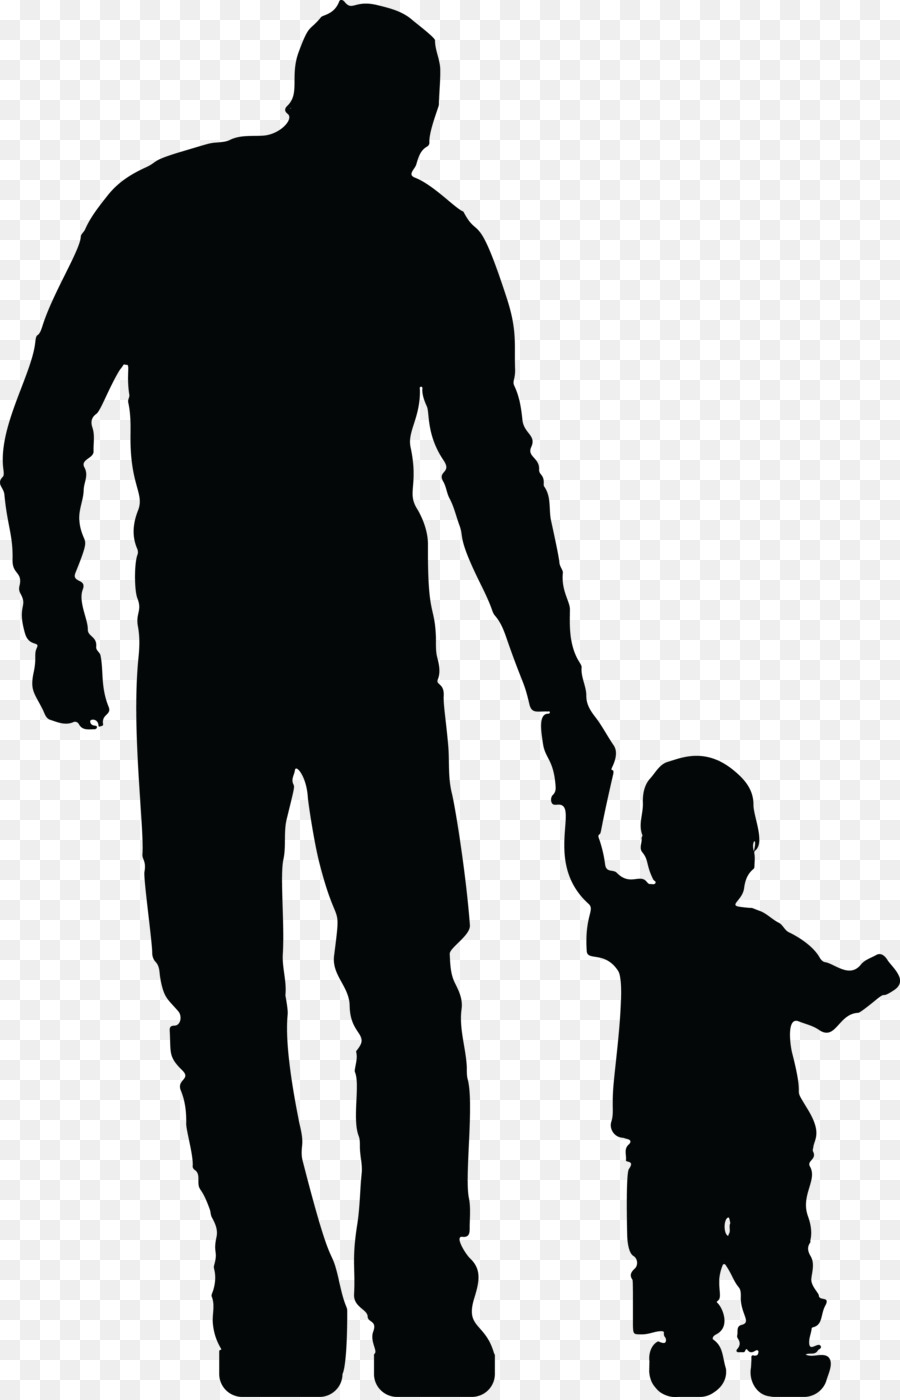 png download - 4000*6207 - Free Transparent Father png ...